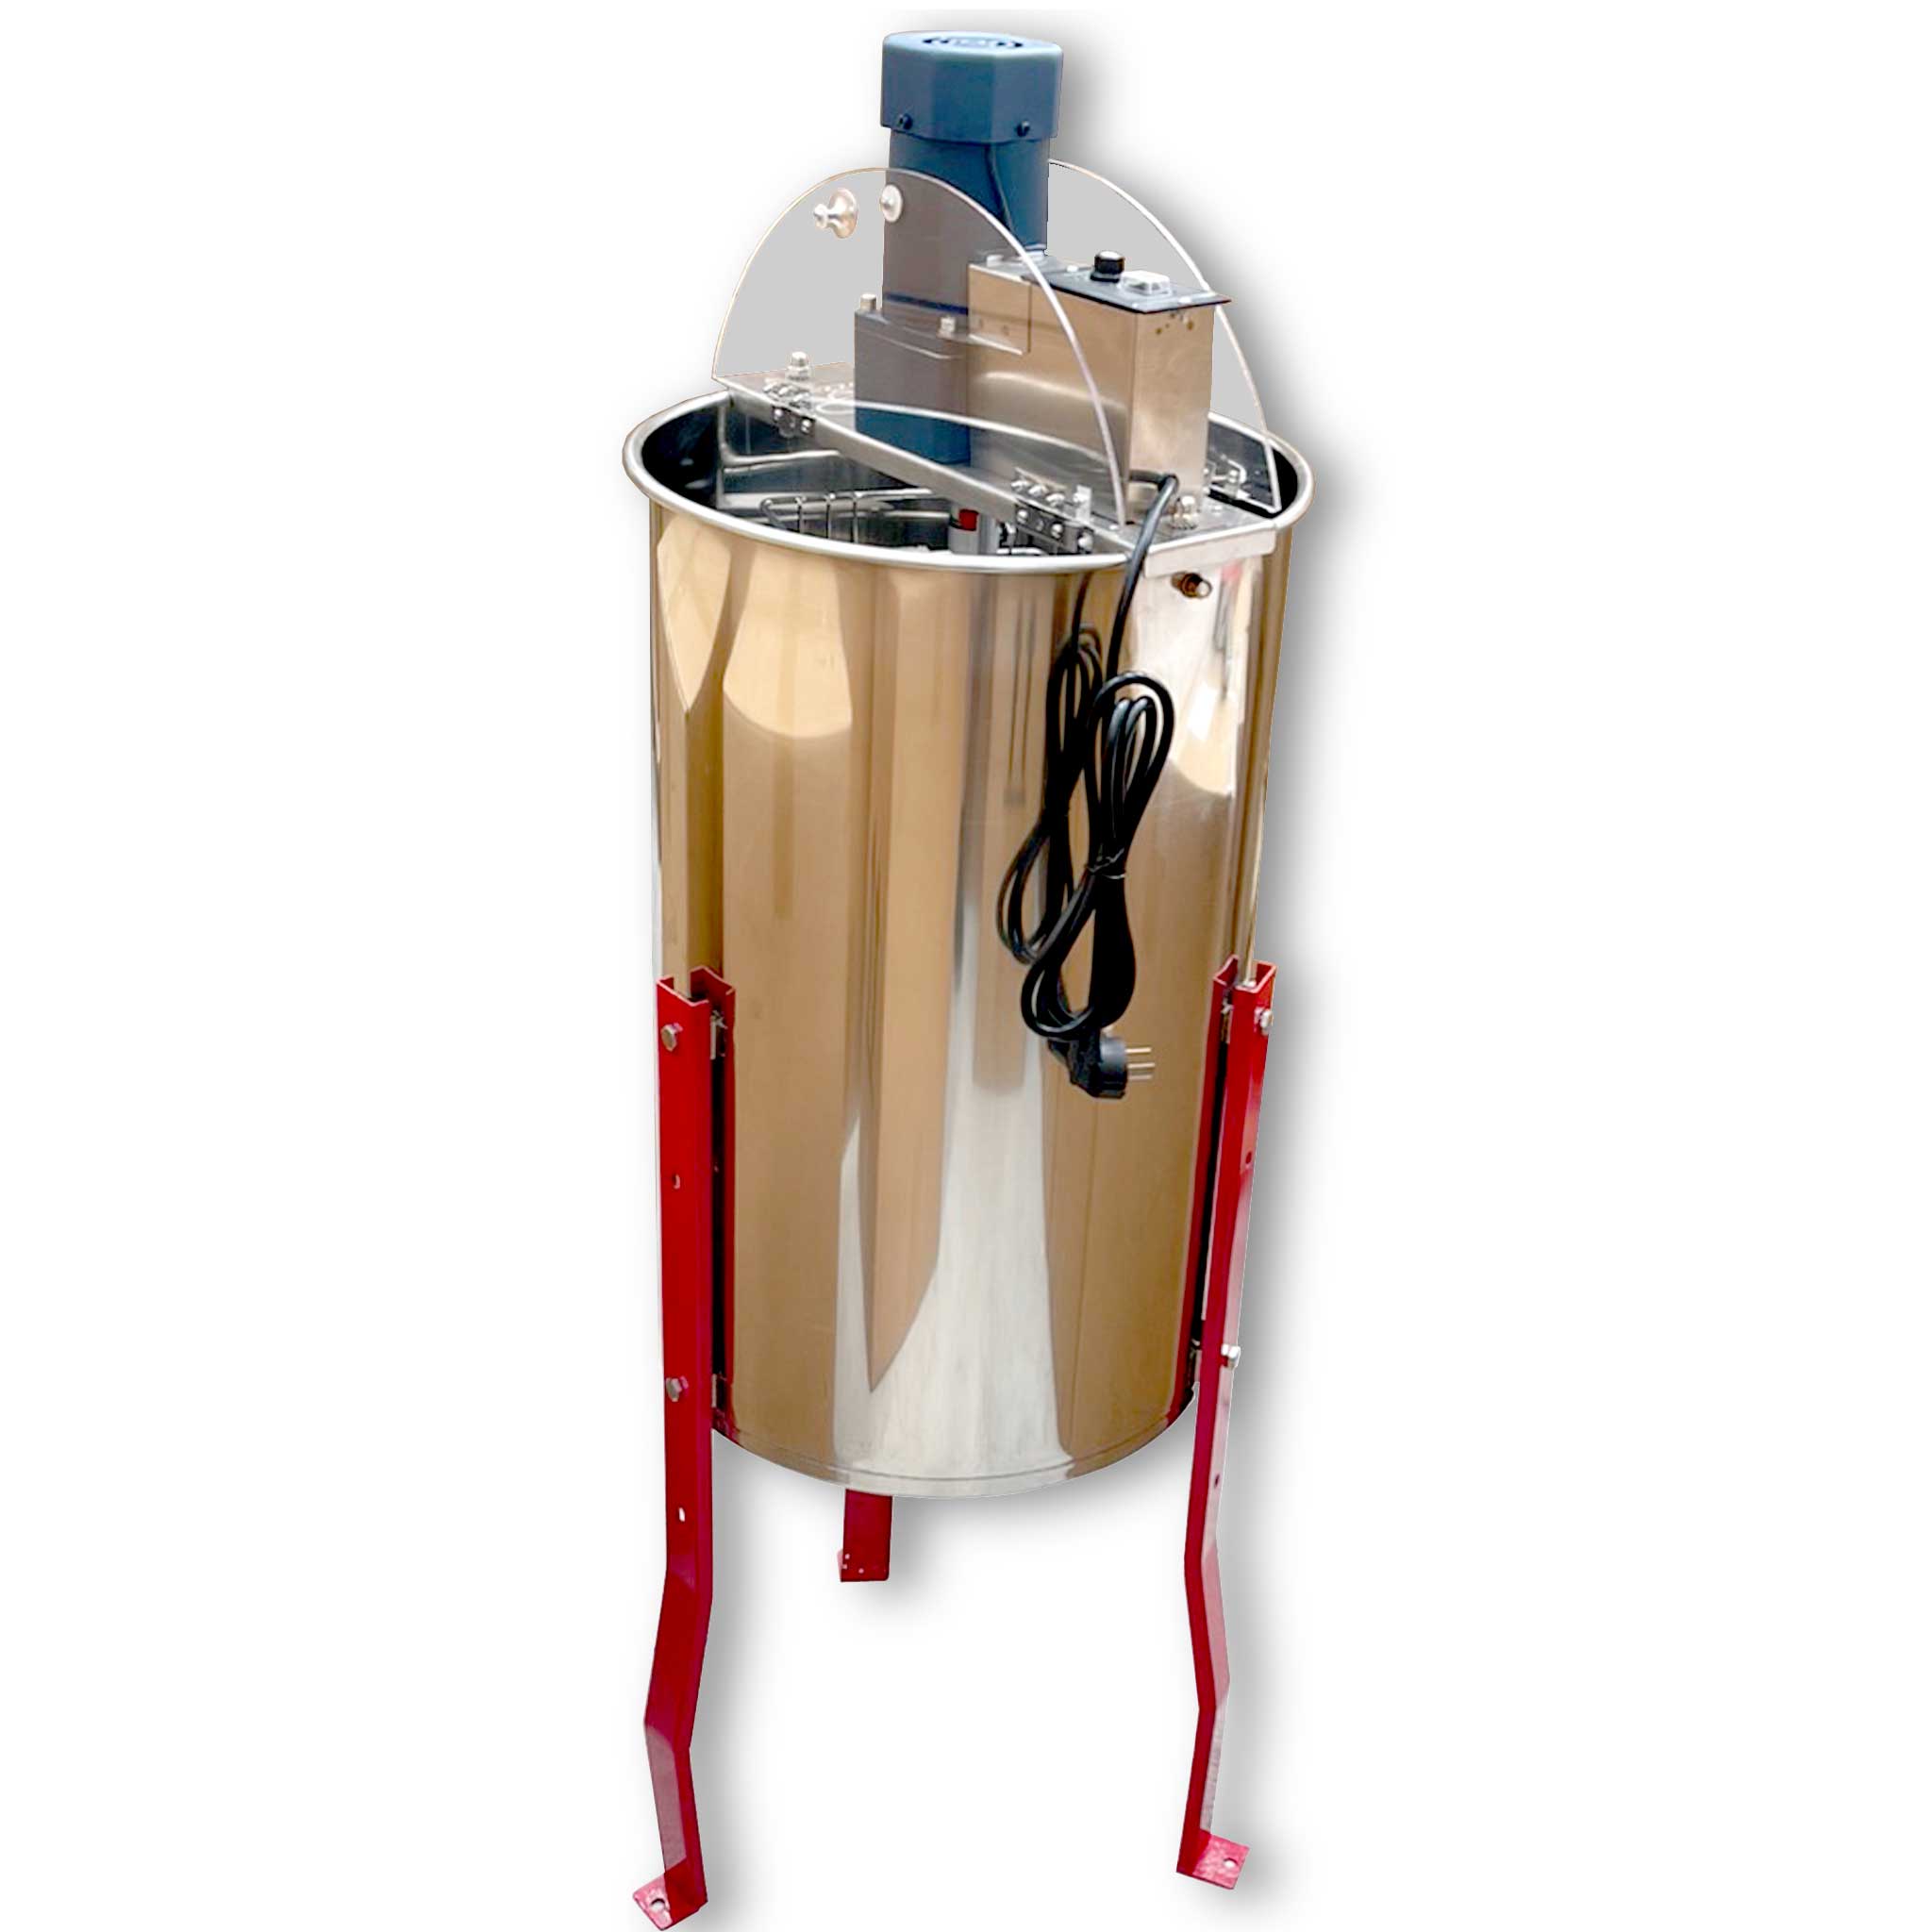 Buzzbee 2 Frame Electric Stainless Steel Honey Extractor - Honey Extractor collection by Buzzbee Beekeeping Supplies